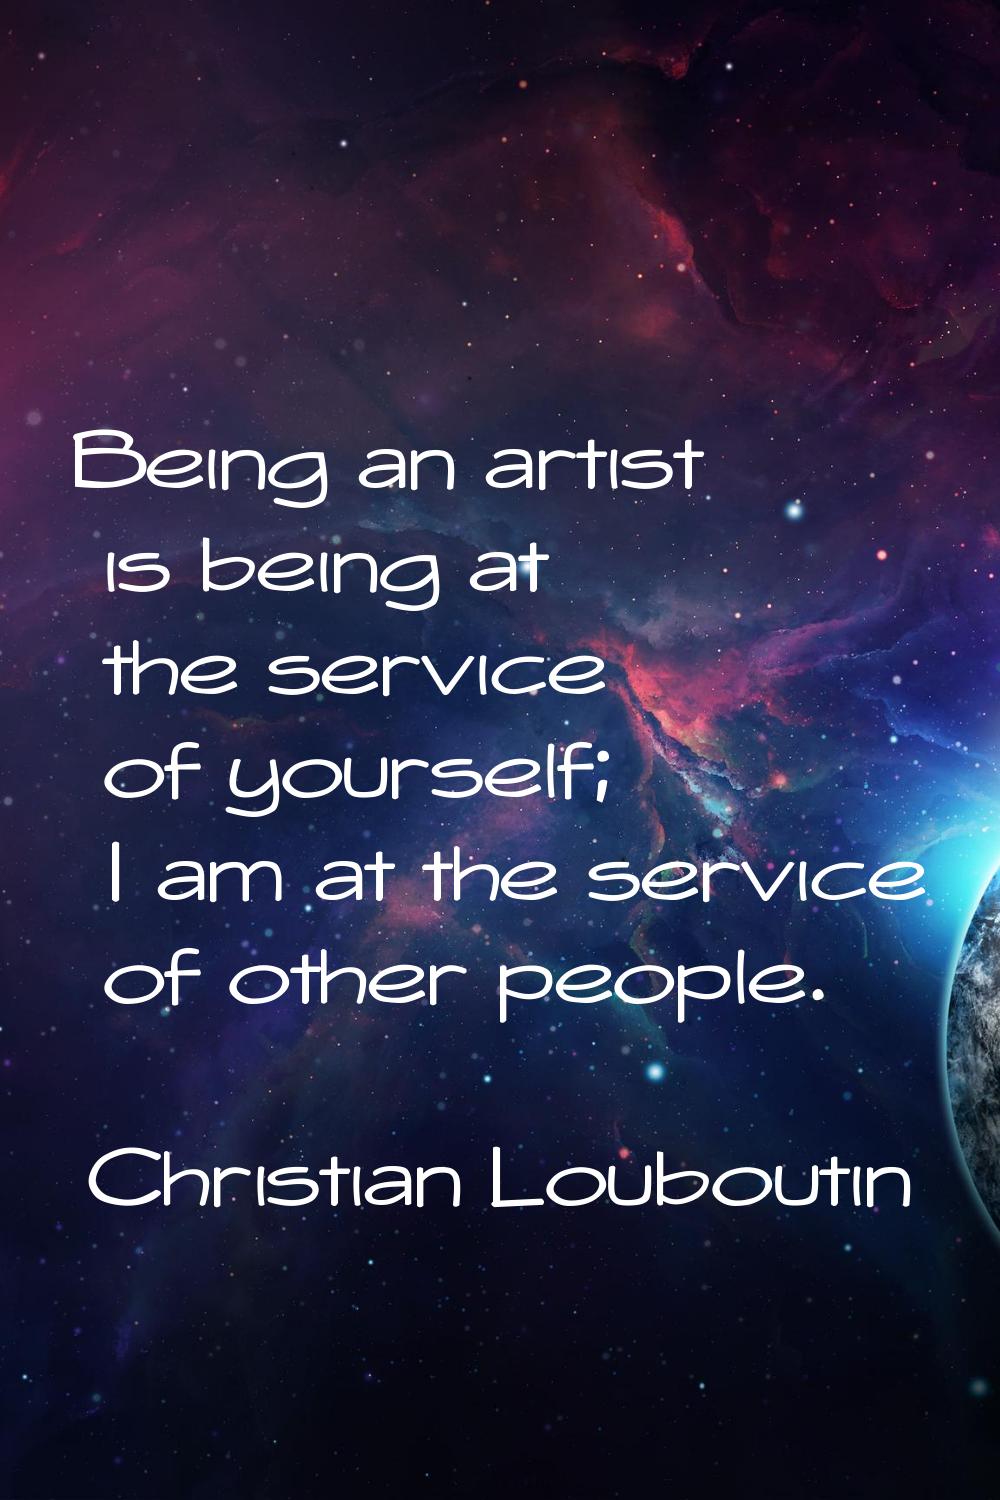 Being an artist is being at the service of yourself; I am at the service of other people.